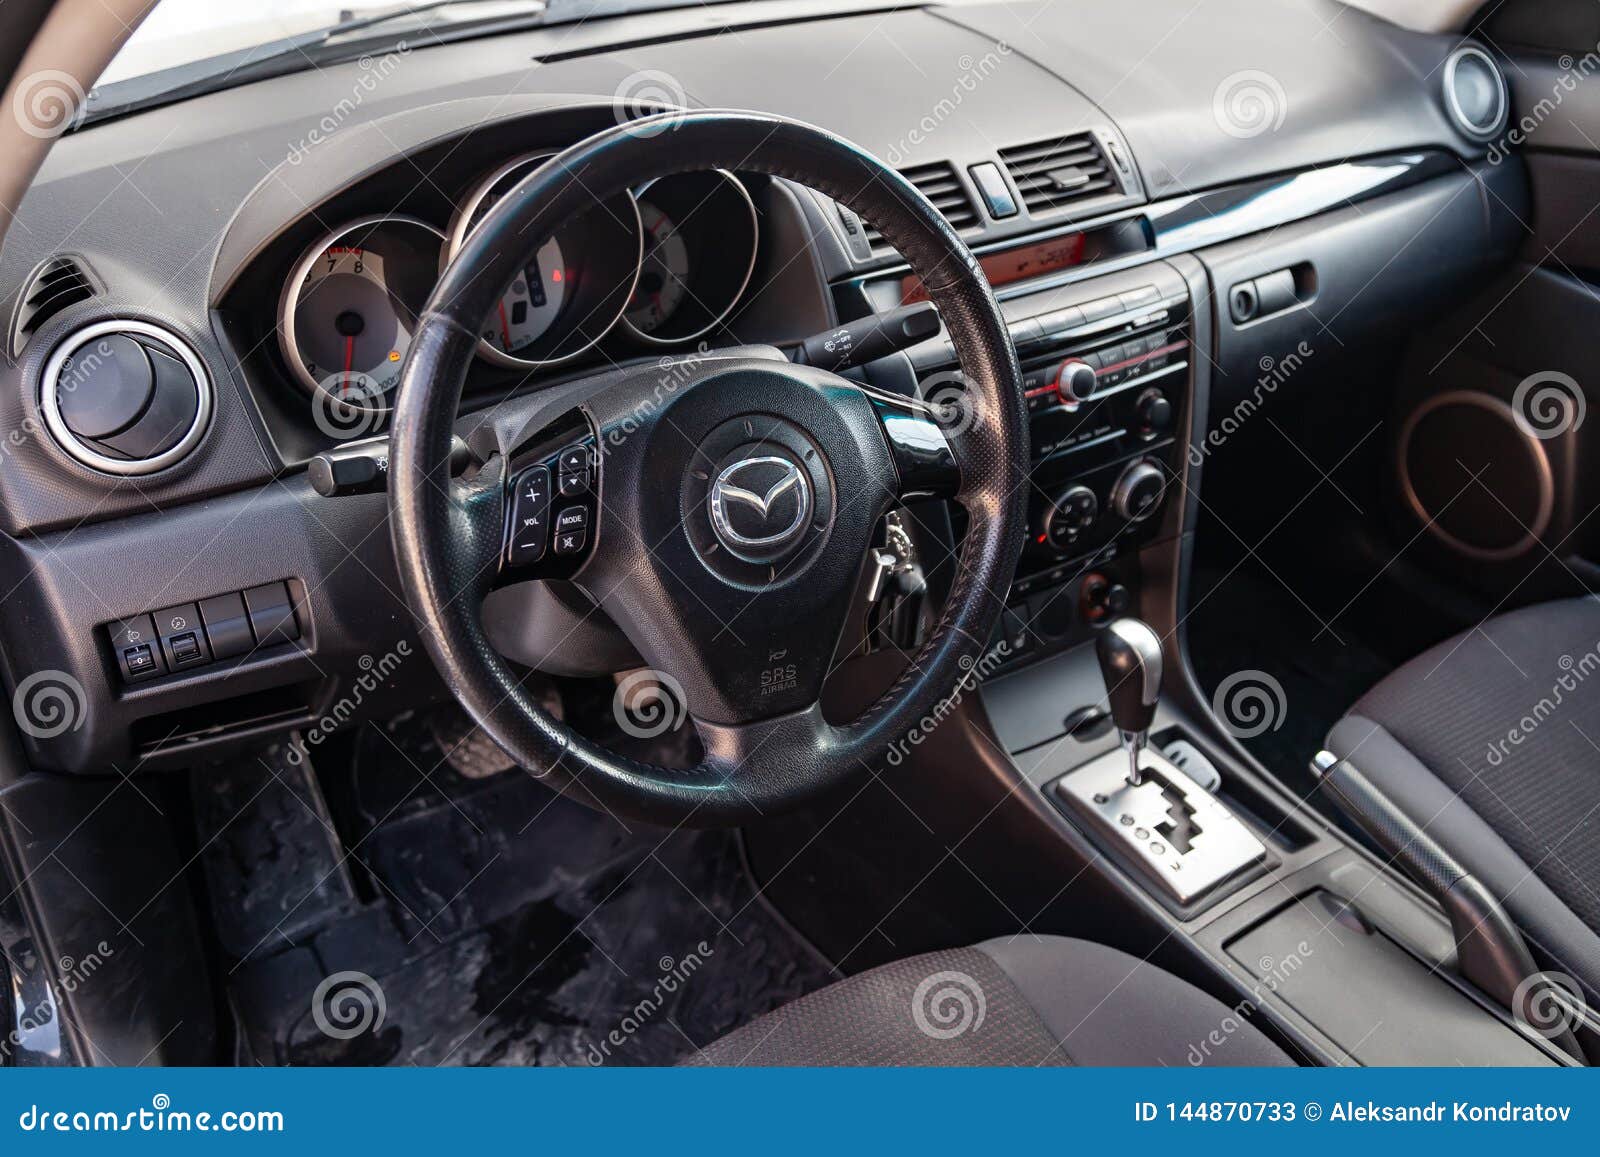 The Interior Of The Car Mazda 3 With A View Of The Steering